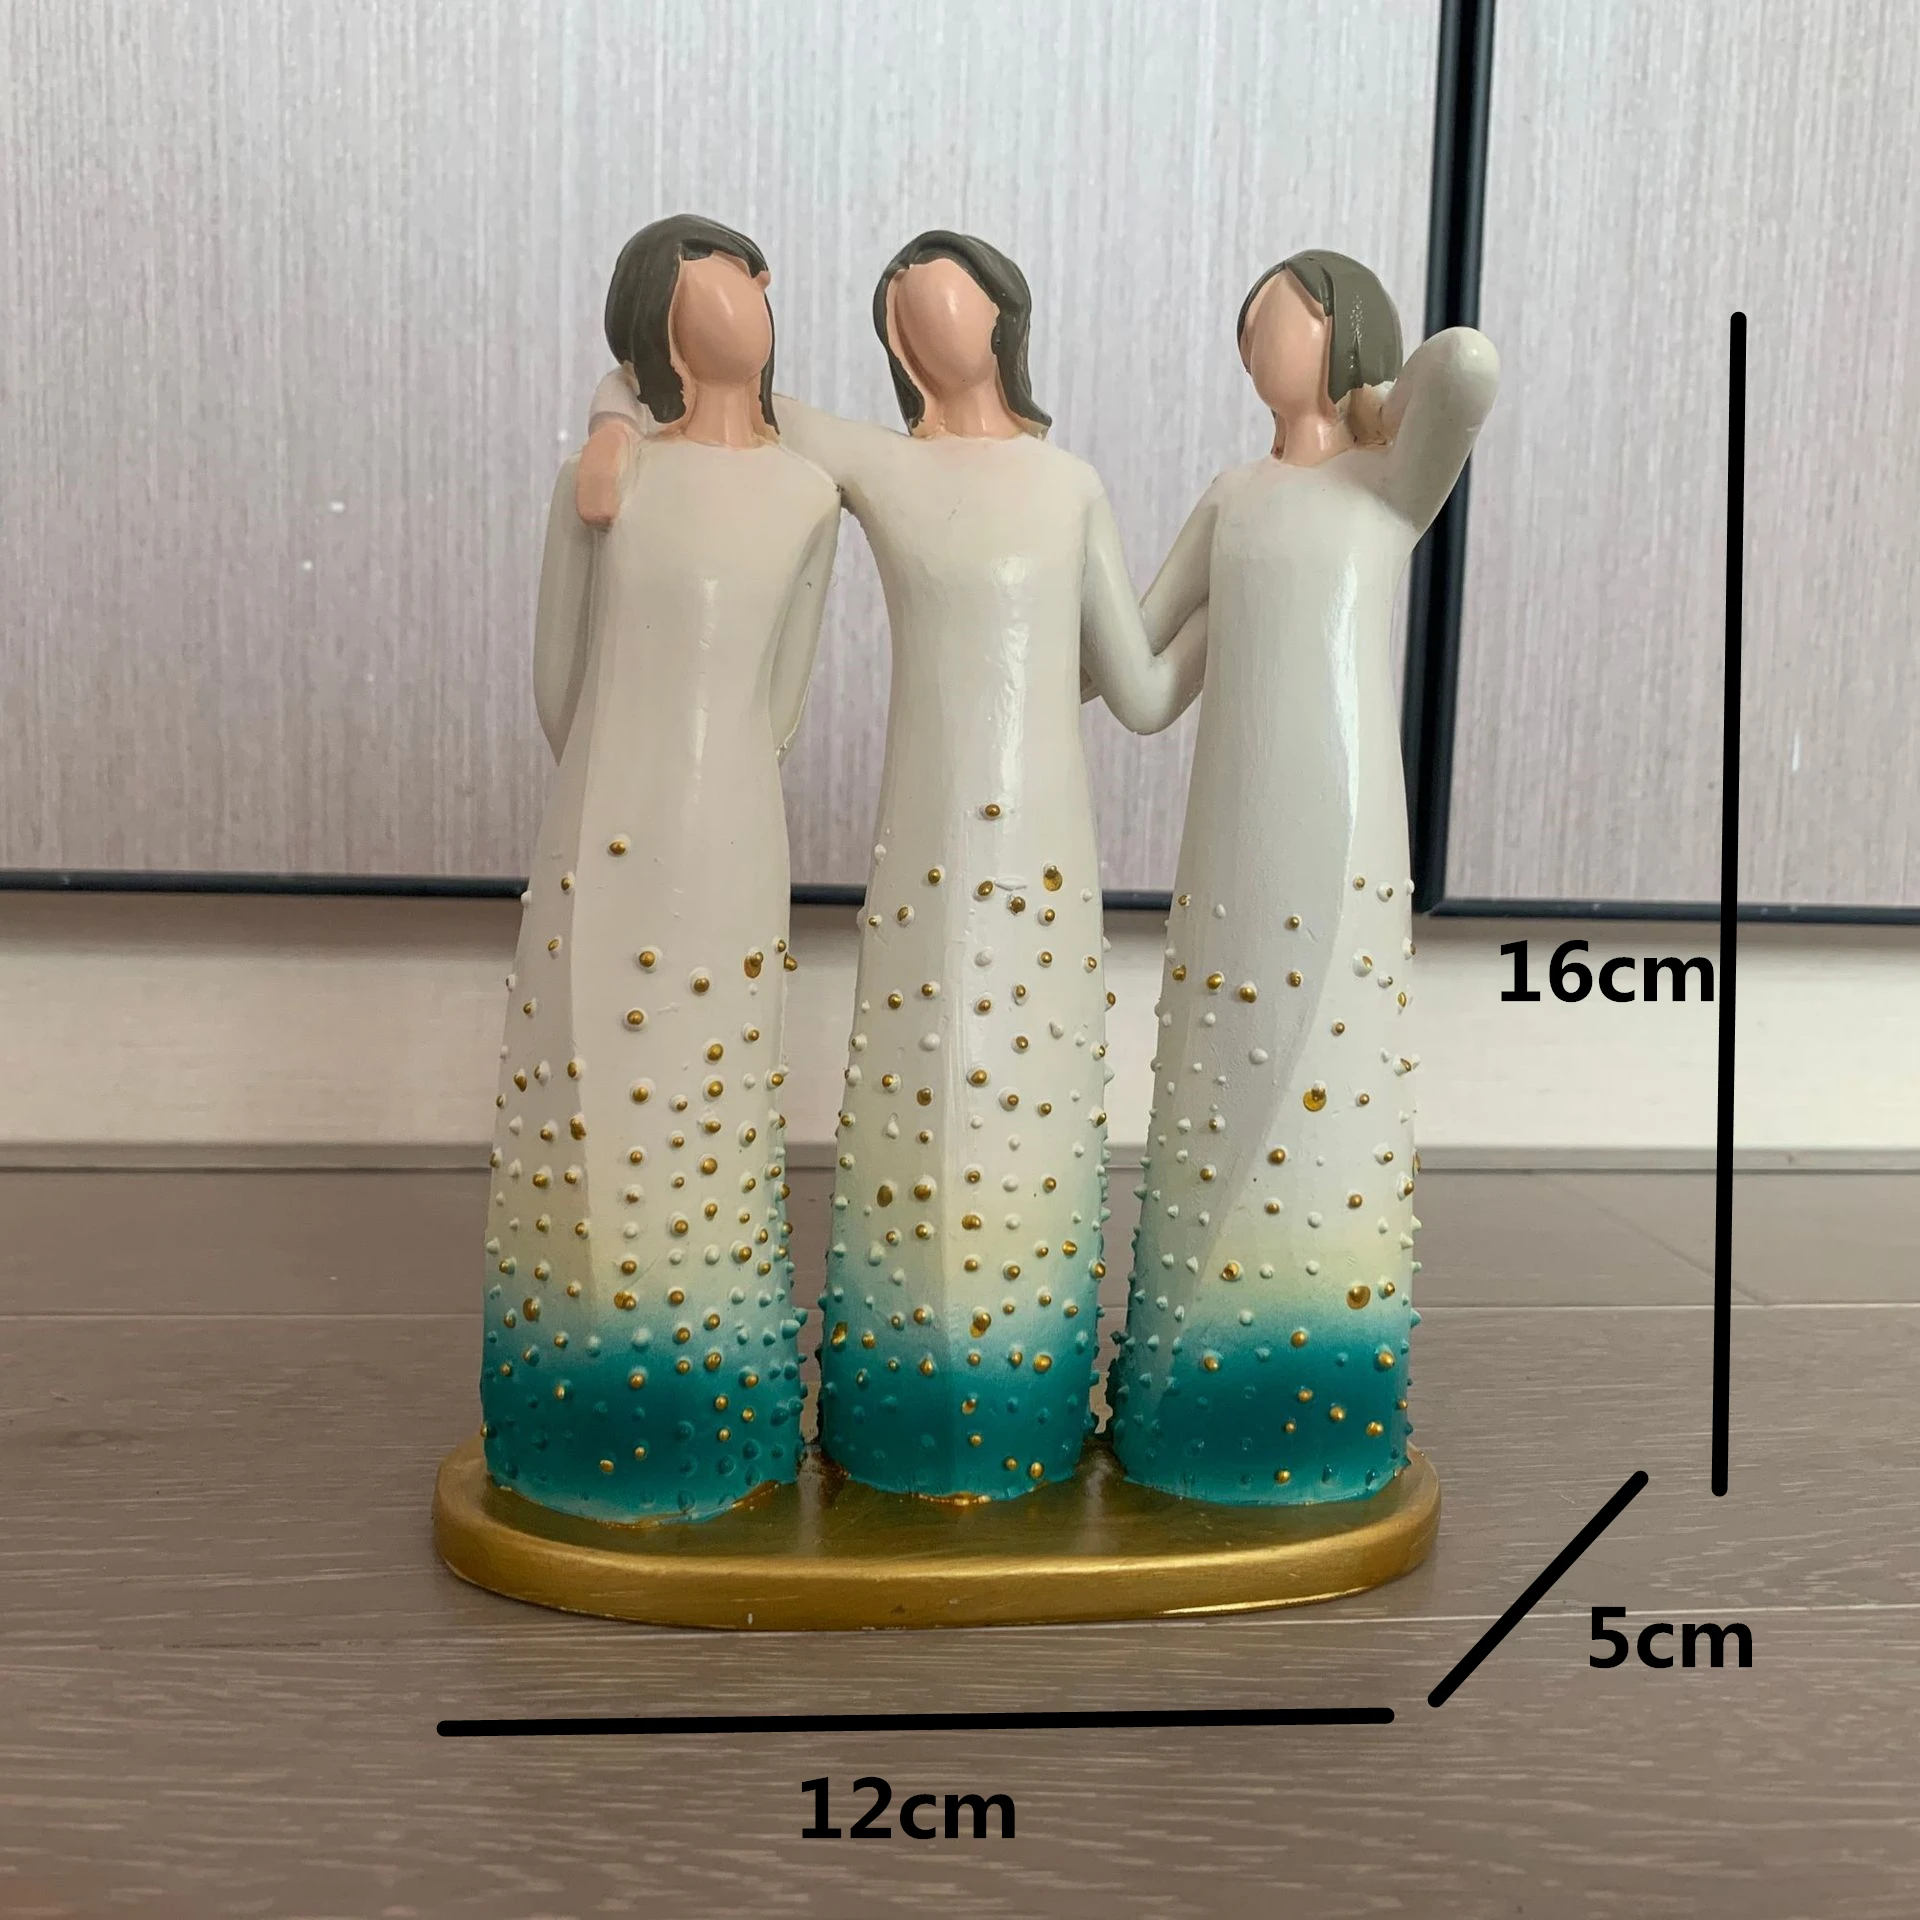 zhaoying Willow Tree Sisters The Statue,By My Side Sculpted Hand-Painted Figure Resin Desktop Ornament Home Decorative Statue Gift for Friends Sisters 